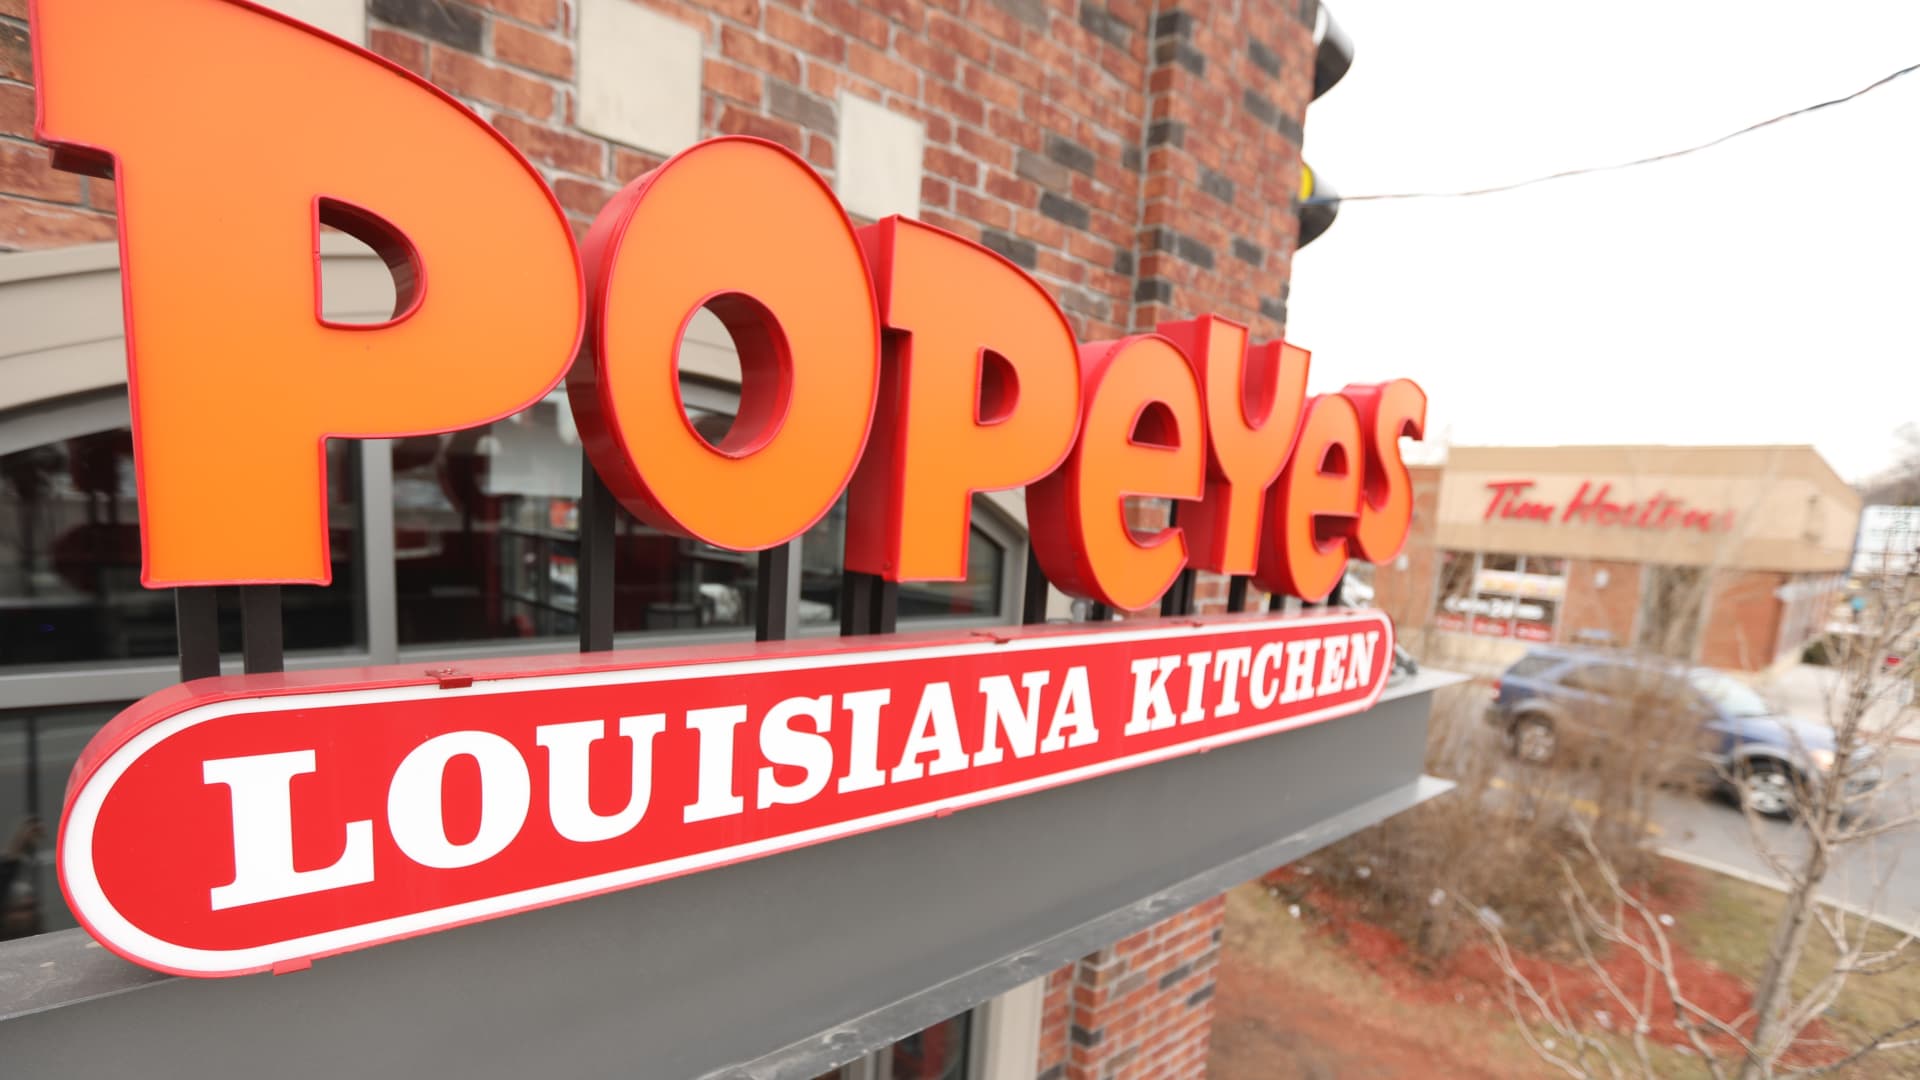 Tim Hortons owner to purchase Popeyes Louisiana Kitchen. The parent company of Tim Hortons and Burger King said it will pay US$1.8 billion cash to buy the Popeyes chain. (Randy Risling/Toronto Star via Getty Images)